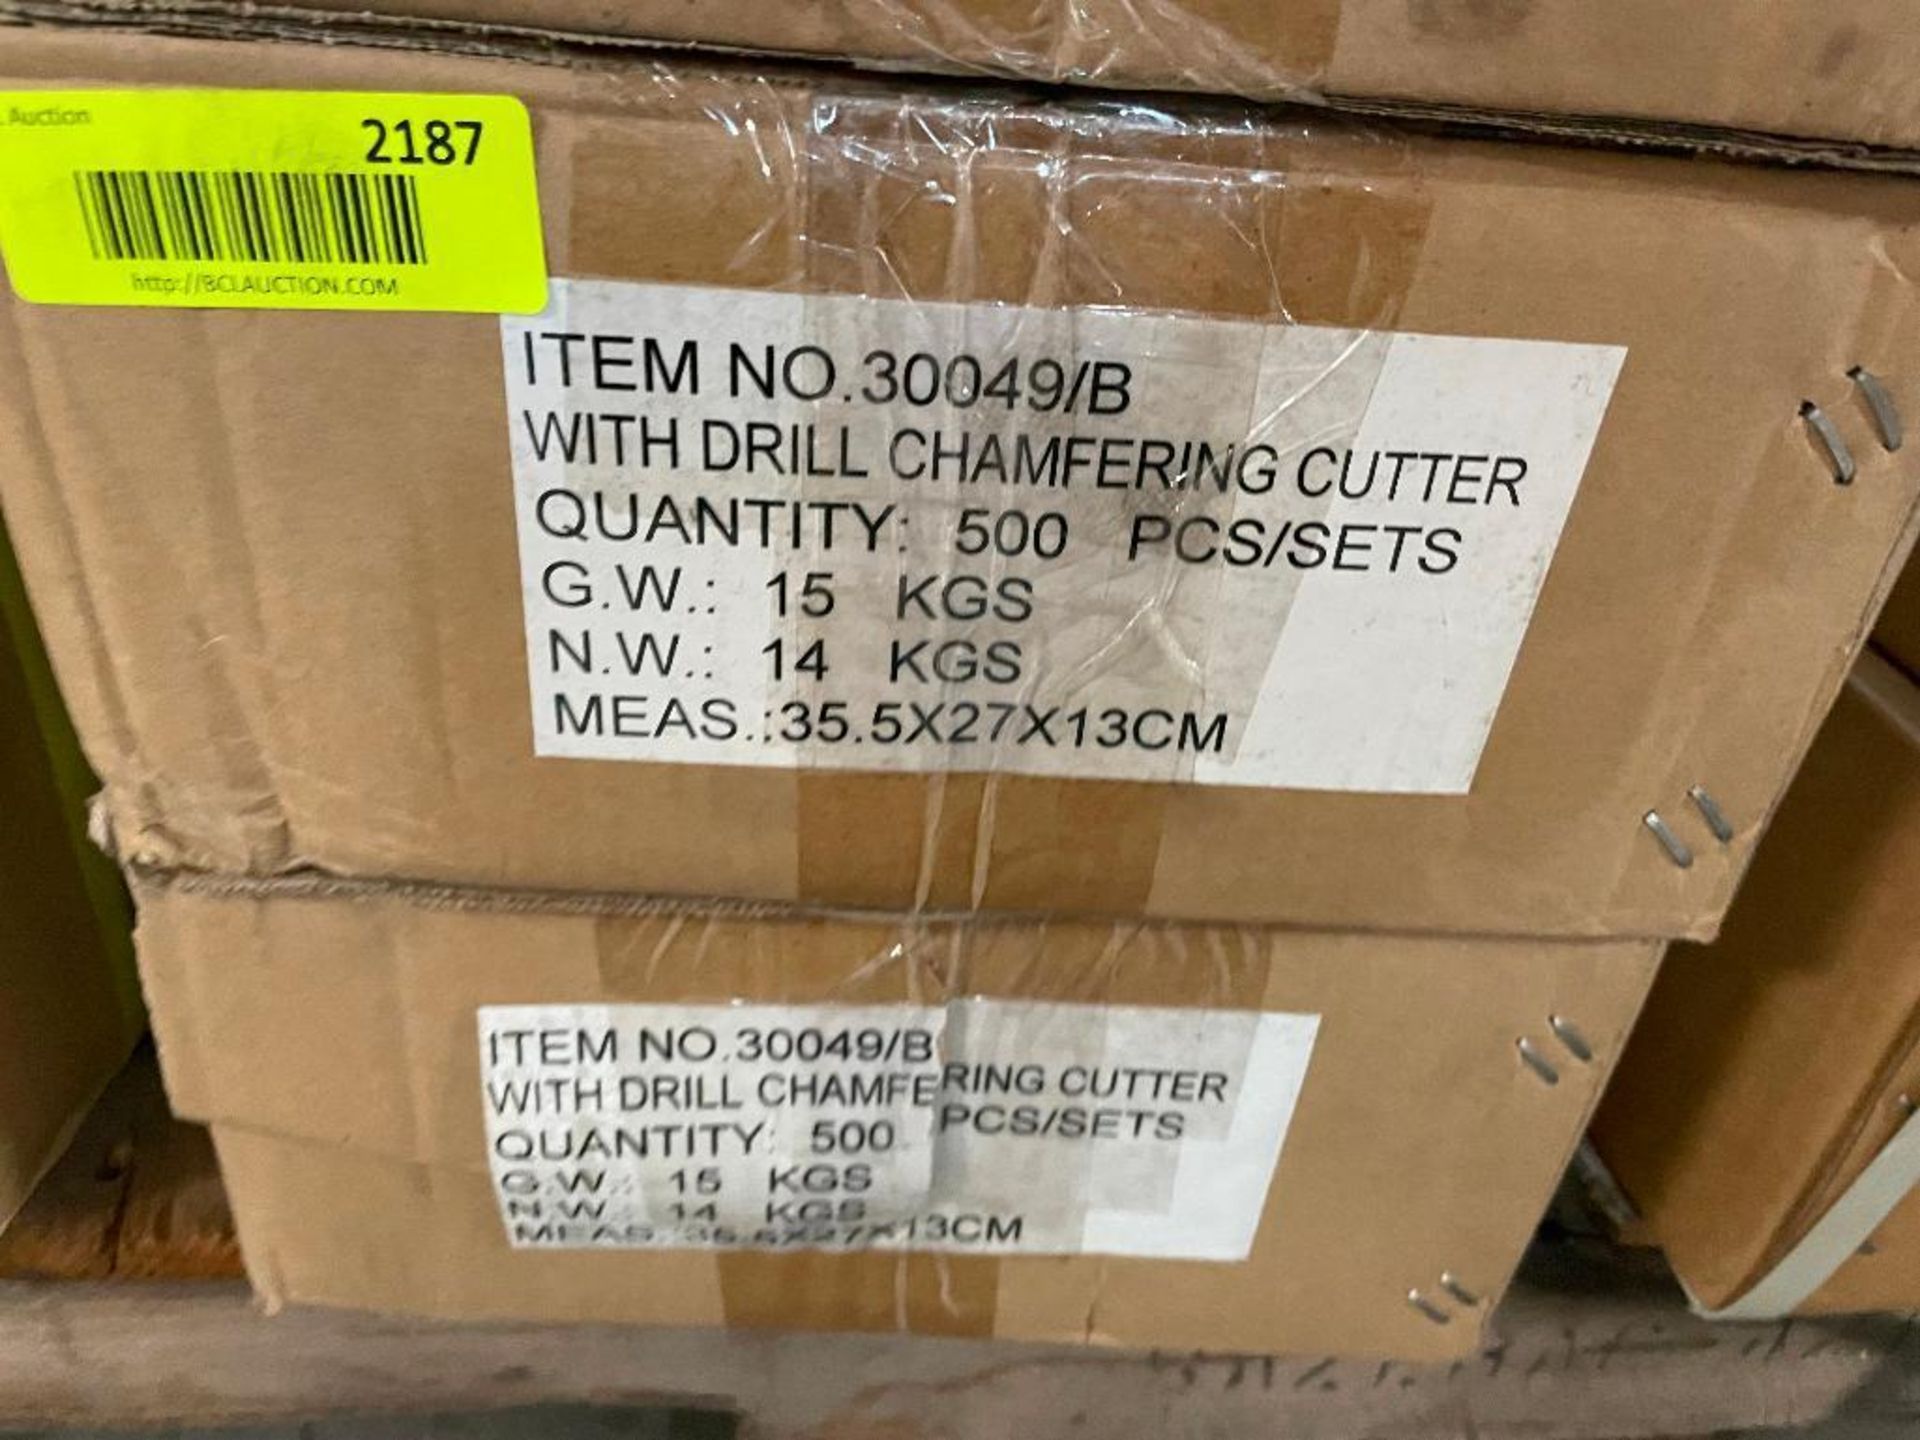 DESCRIPTION: (2) CASES OF WOOD DRILL CHAFERING CUTTER. 500 PER CASE, 1000 IN LOT BRAND / MODEL: 3004 - Image 6 of 6